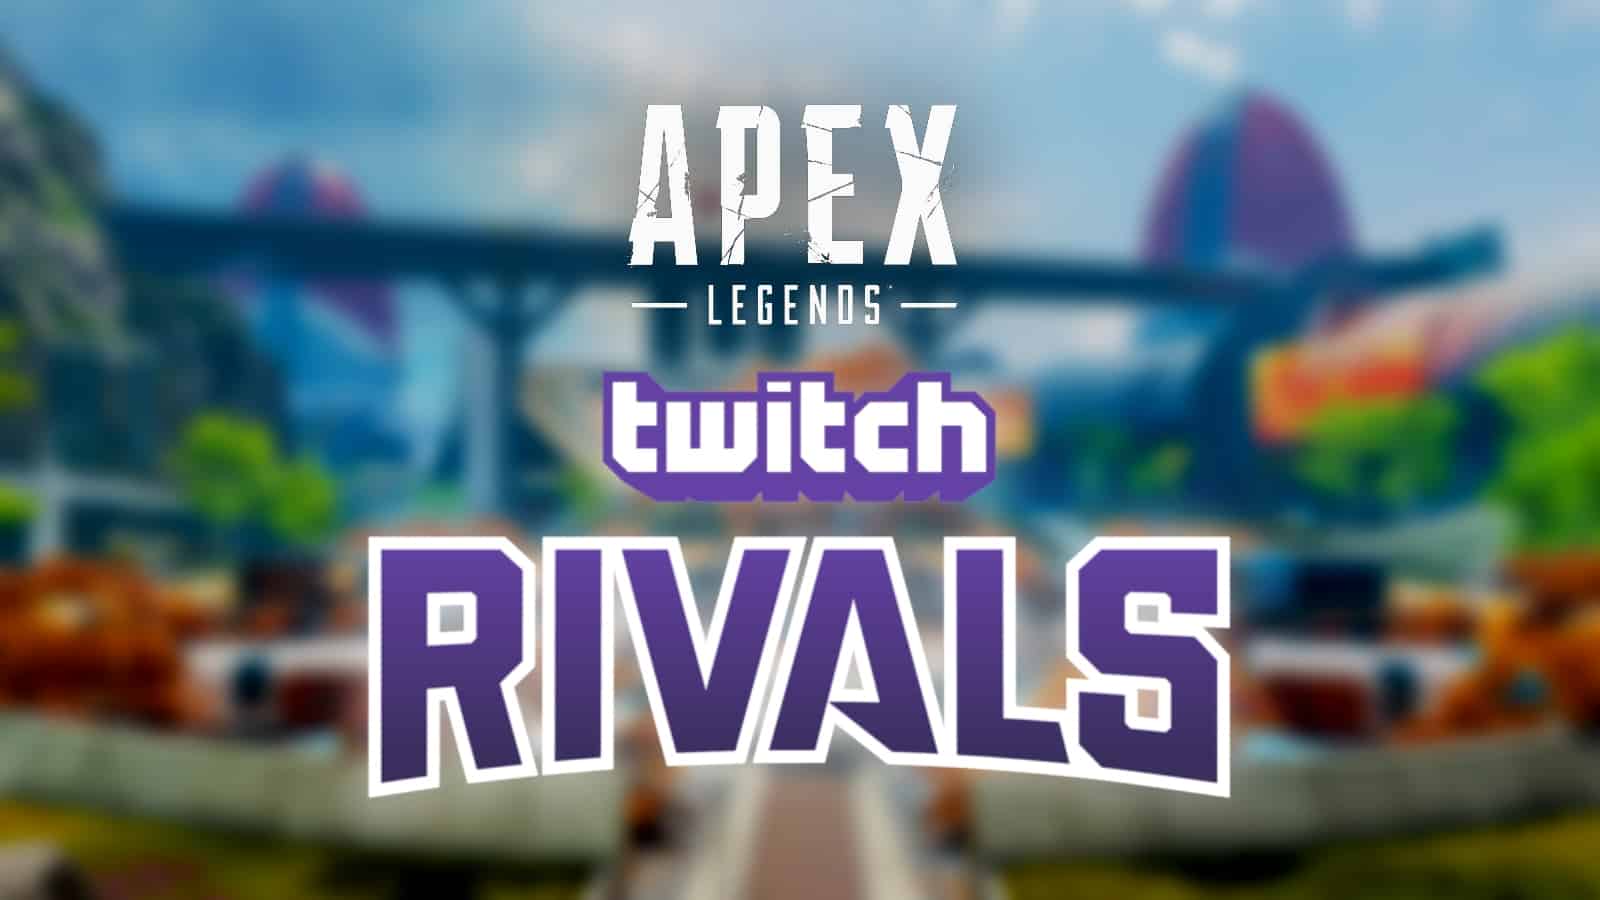 apex legends twitch rivals logos with blurred Olympus Apex Legends map in background